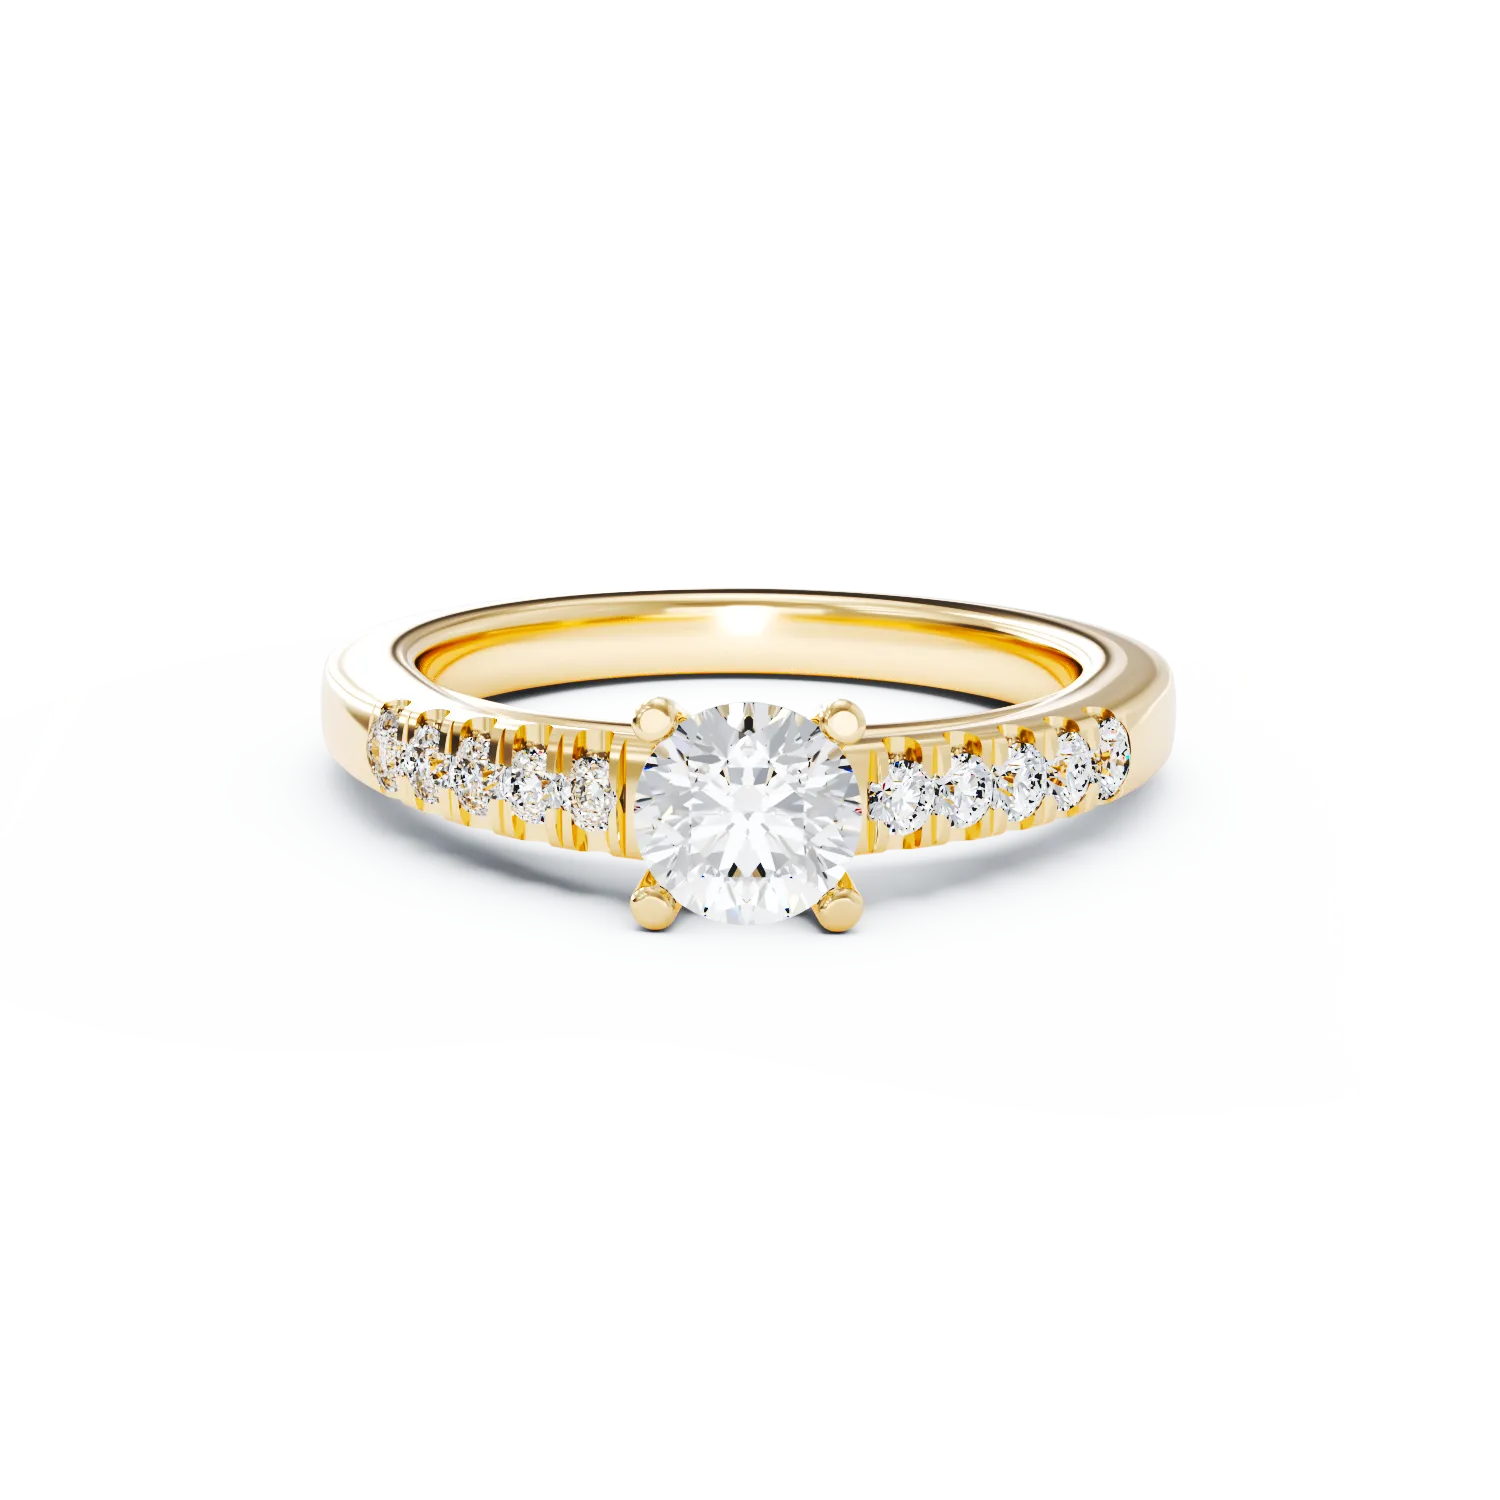 18K yellow gold engagement ring with 0.5ct diamond and 0.13ct diamonds